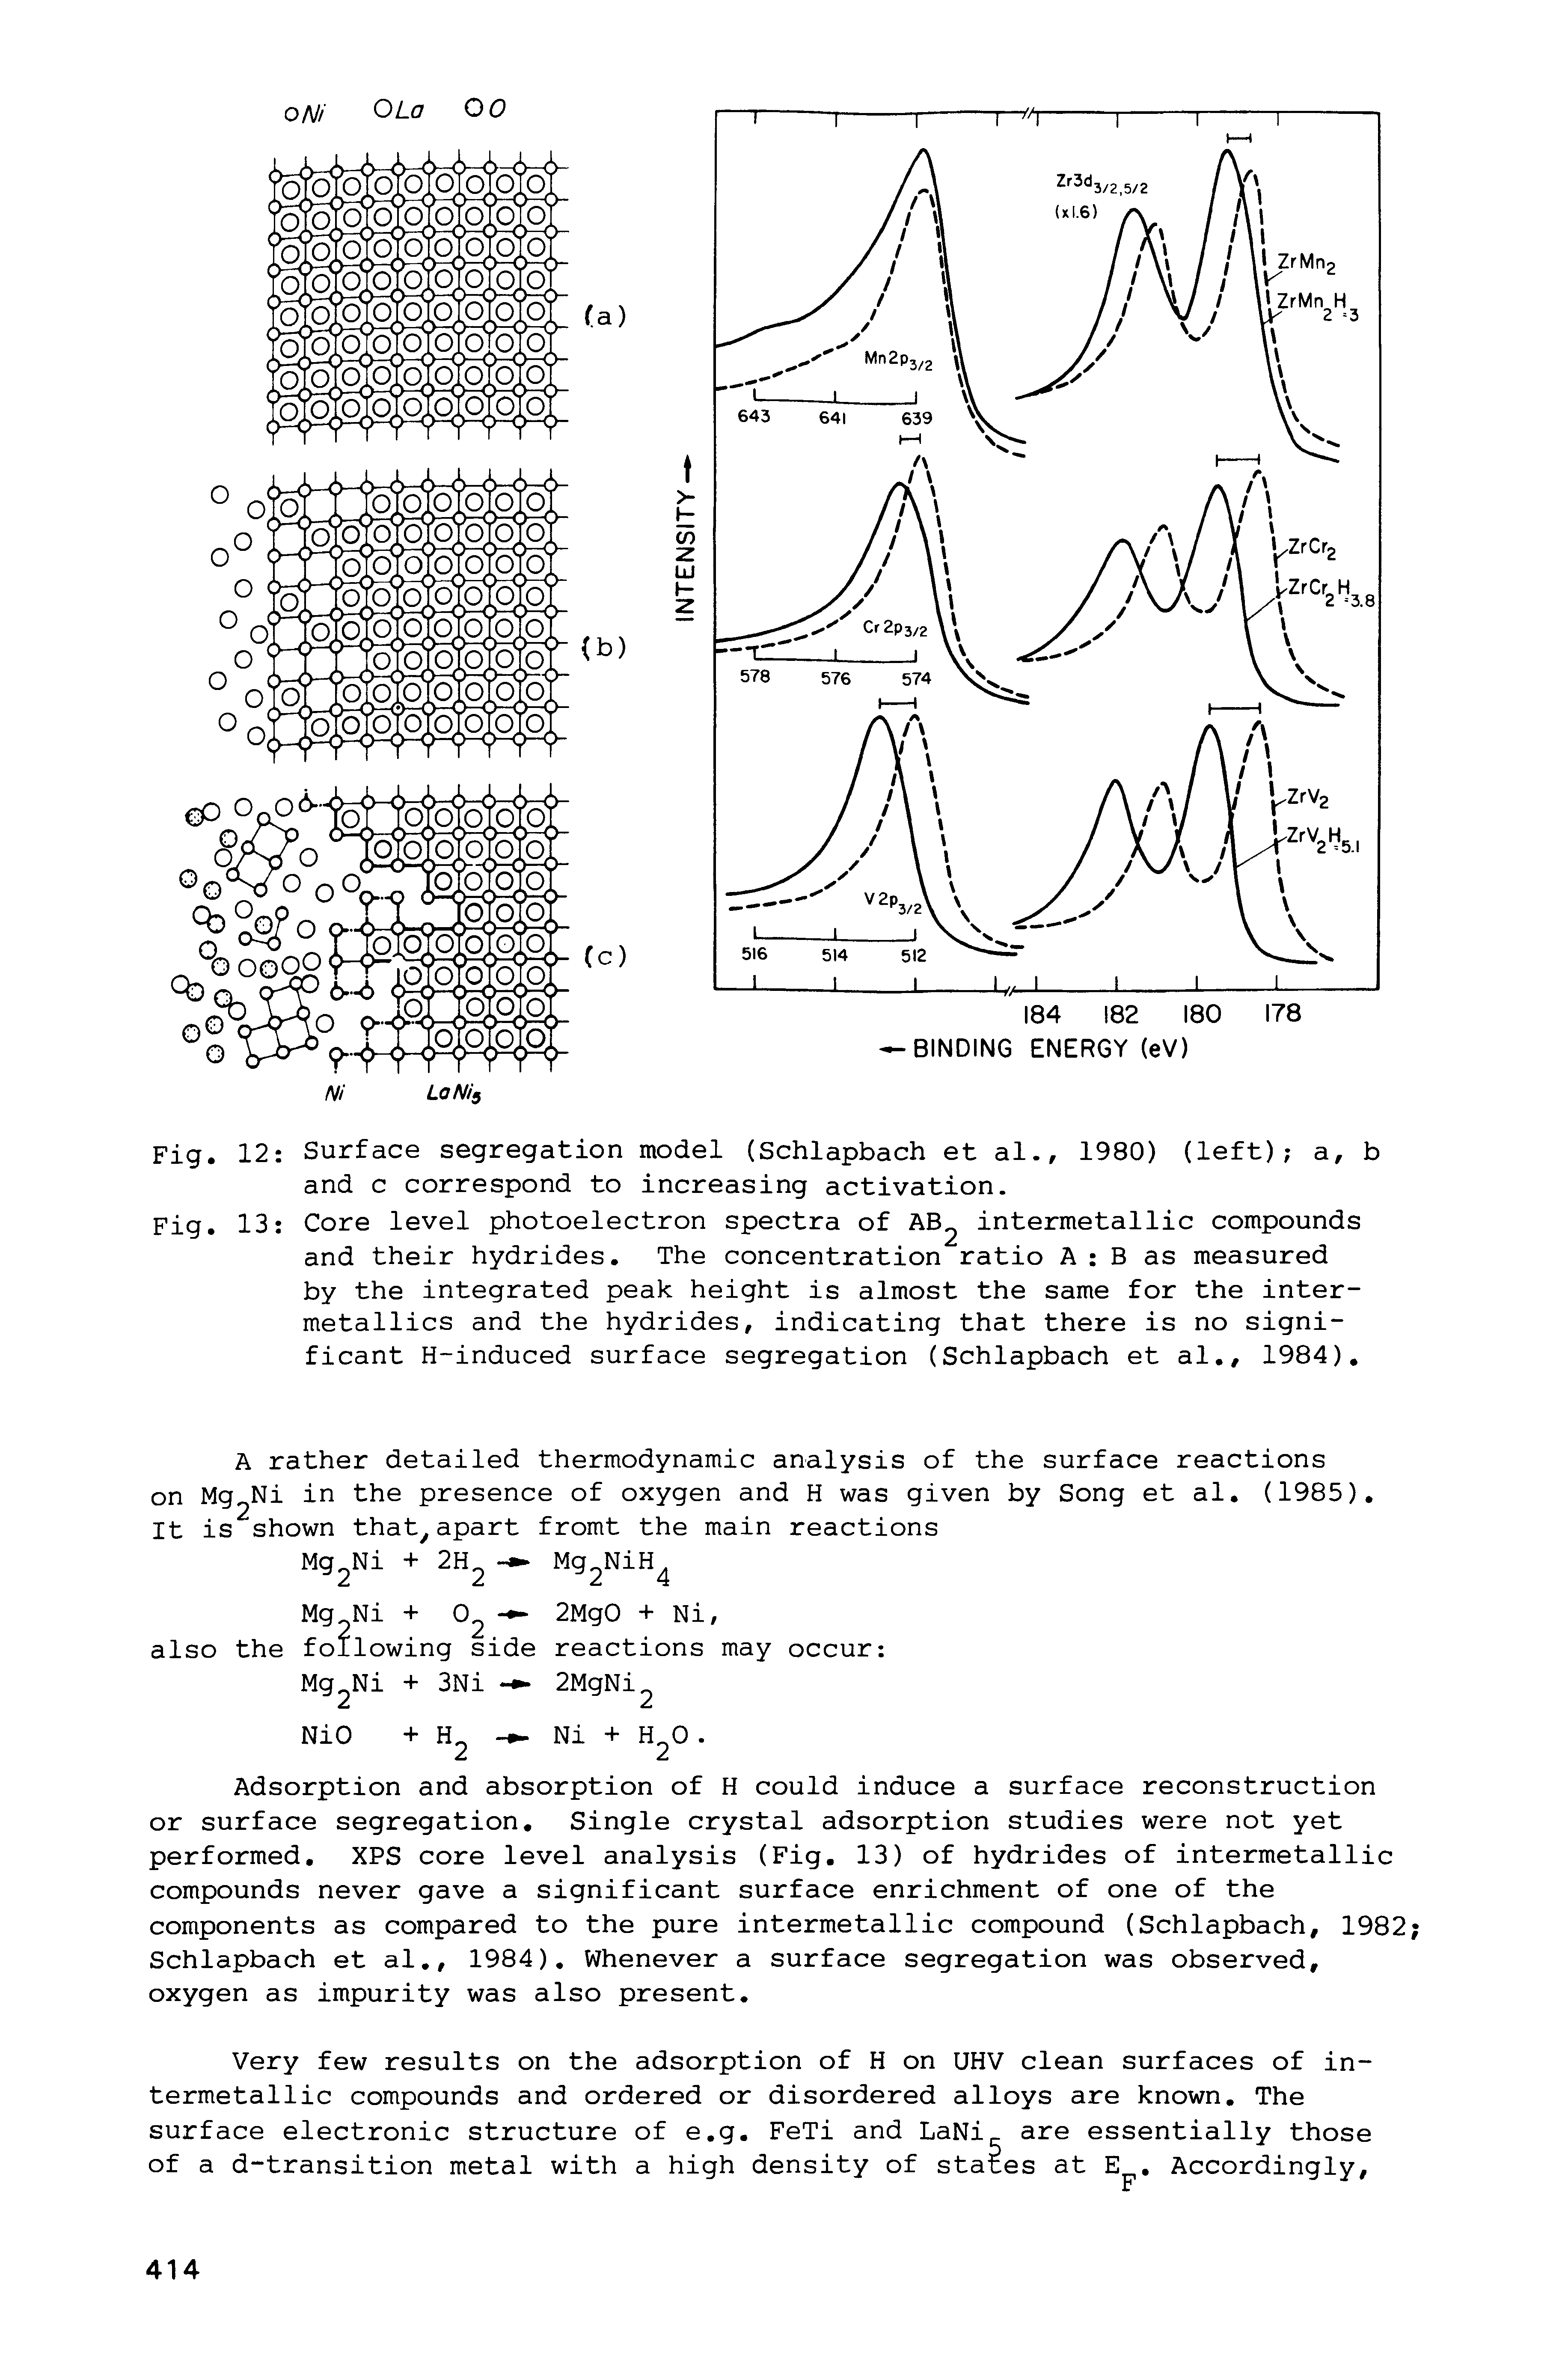 Fig. 13 Core level photoelectron spectra of AB intermetallic compounds and their hydrides. The concentration ratio A B as measured by the integrated peak height is almost the same for the inter-metallics and the hydrides, indicating that there is no significant H-induced surface segregation (Schlapbach et al., 1984).